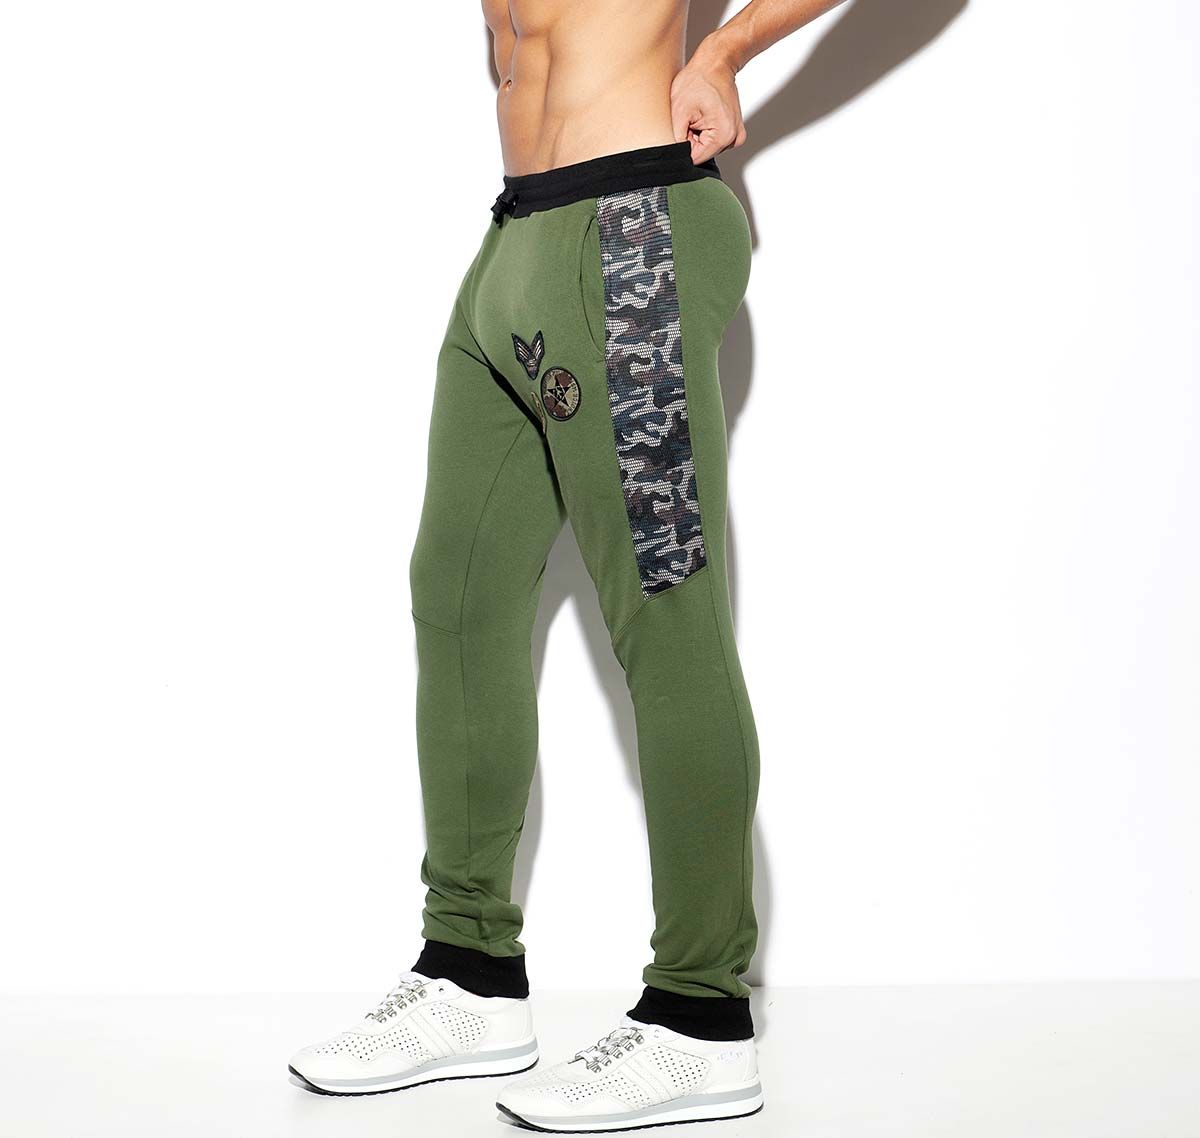 ES Collection Training pants ARMY PADDED SPORT PANTS SP221, green